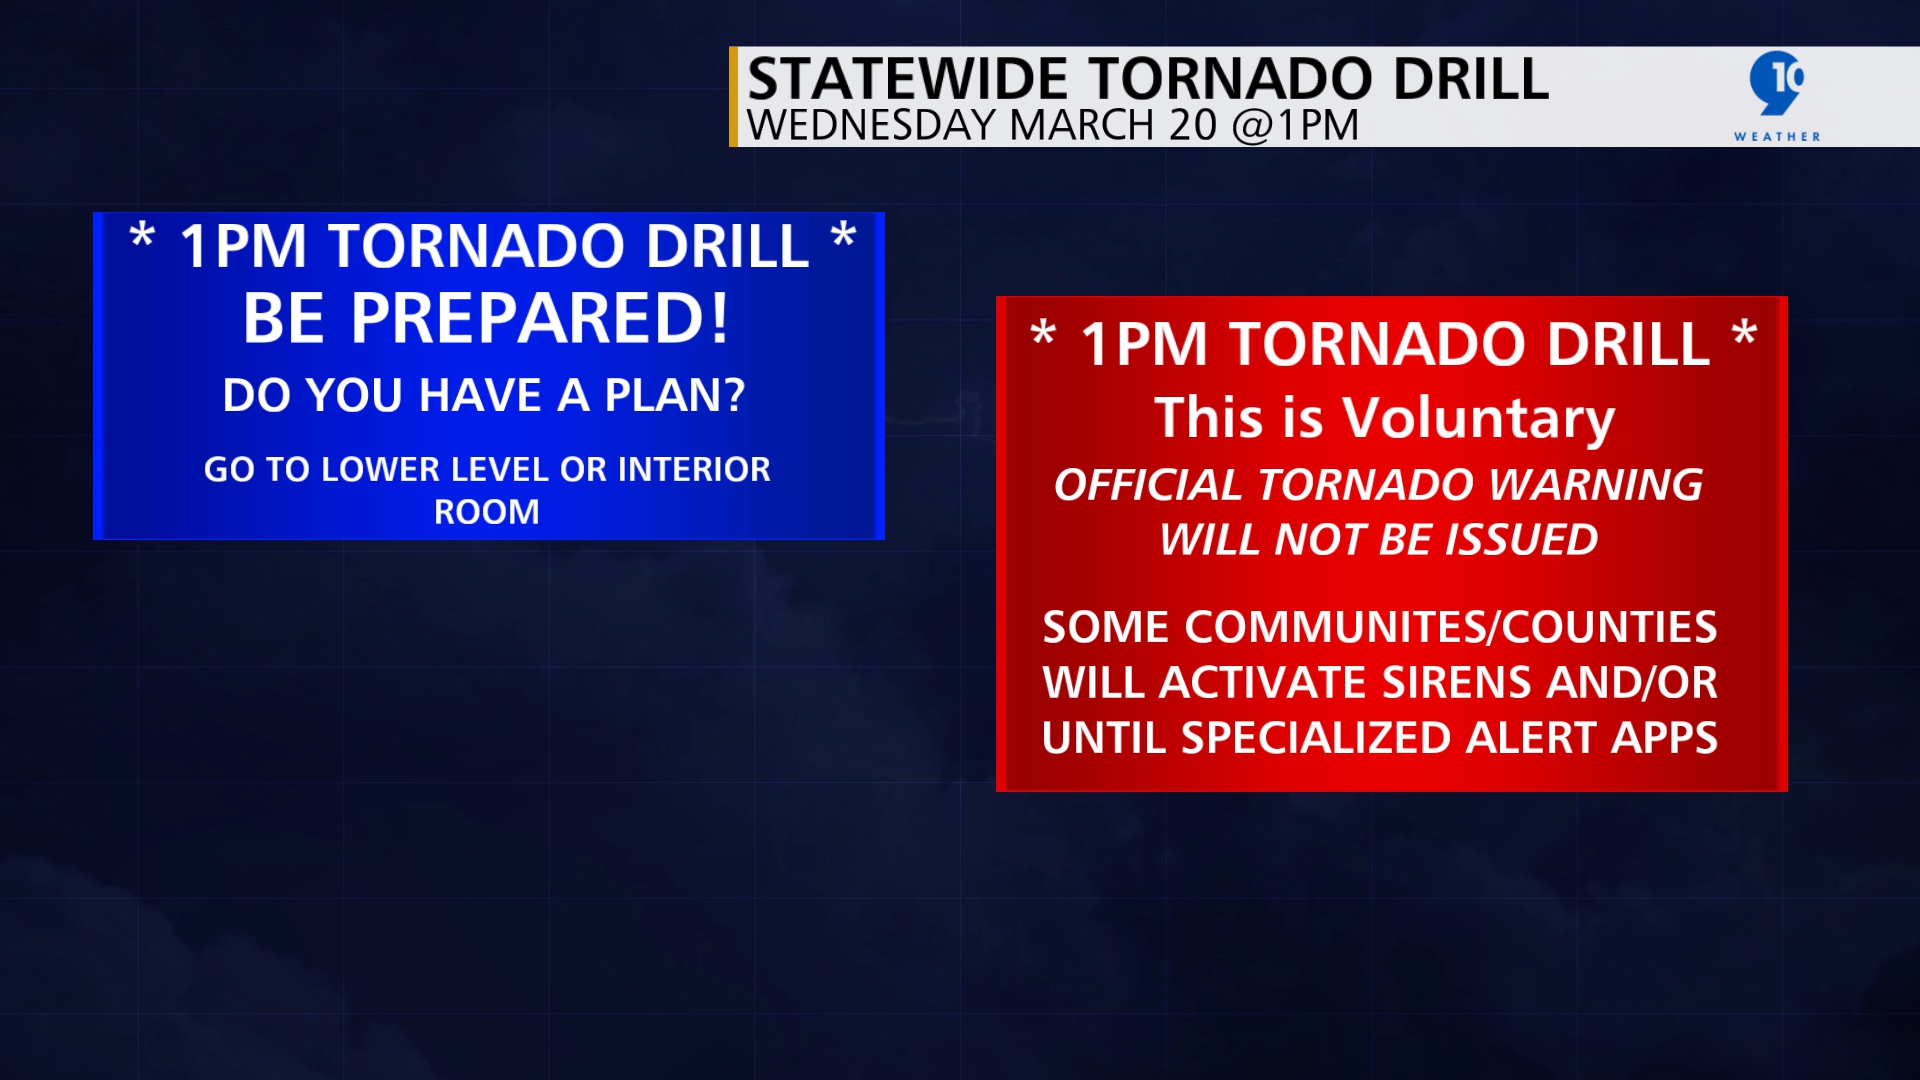 Tornado drill scheduled for 1 p.m. Wednesday across all of Michigan